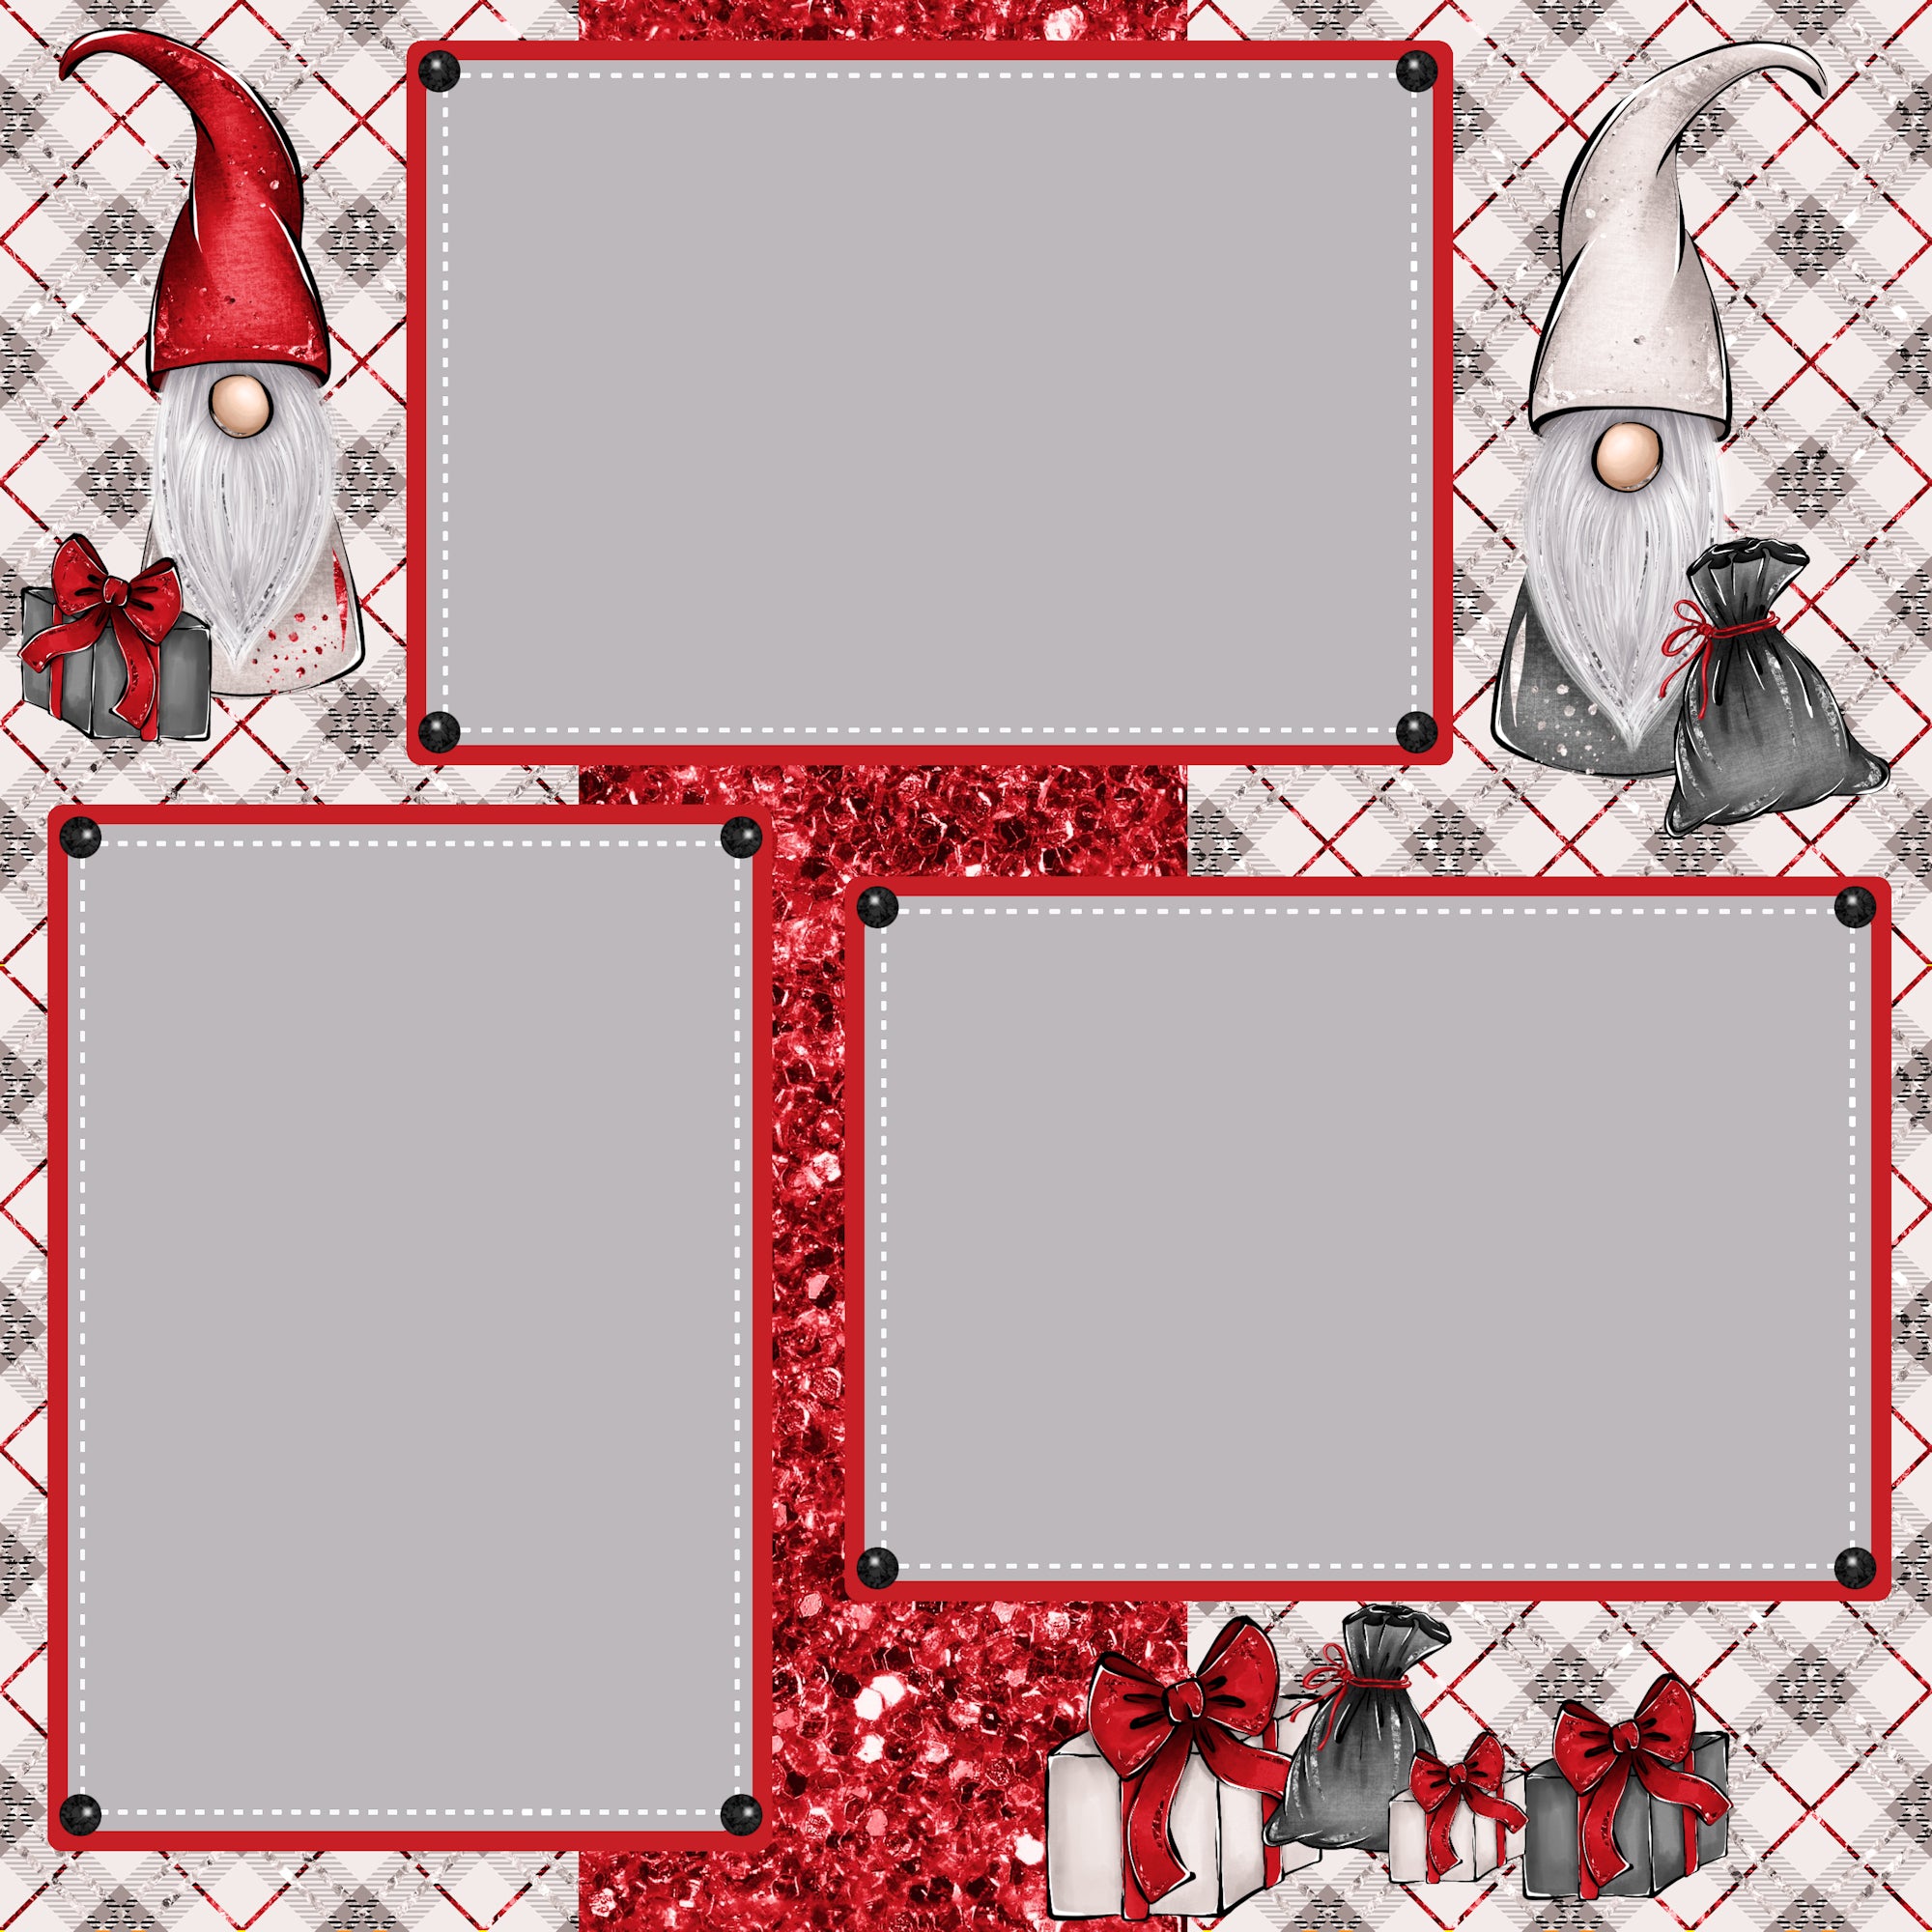 Merry Christmas Gnomes (2) - 12 x 12 Premade, Printed Scrapbook Pages by SSC Designs